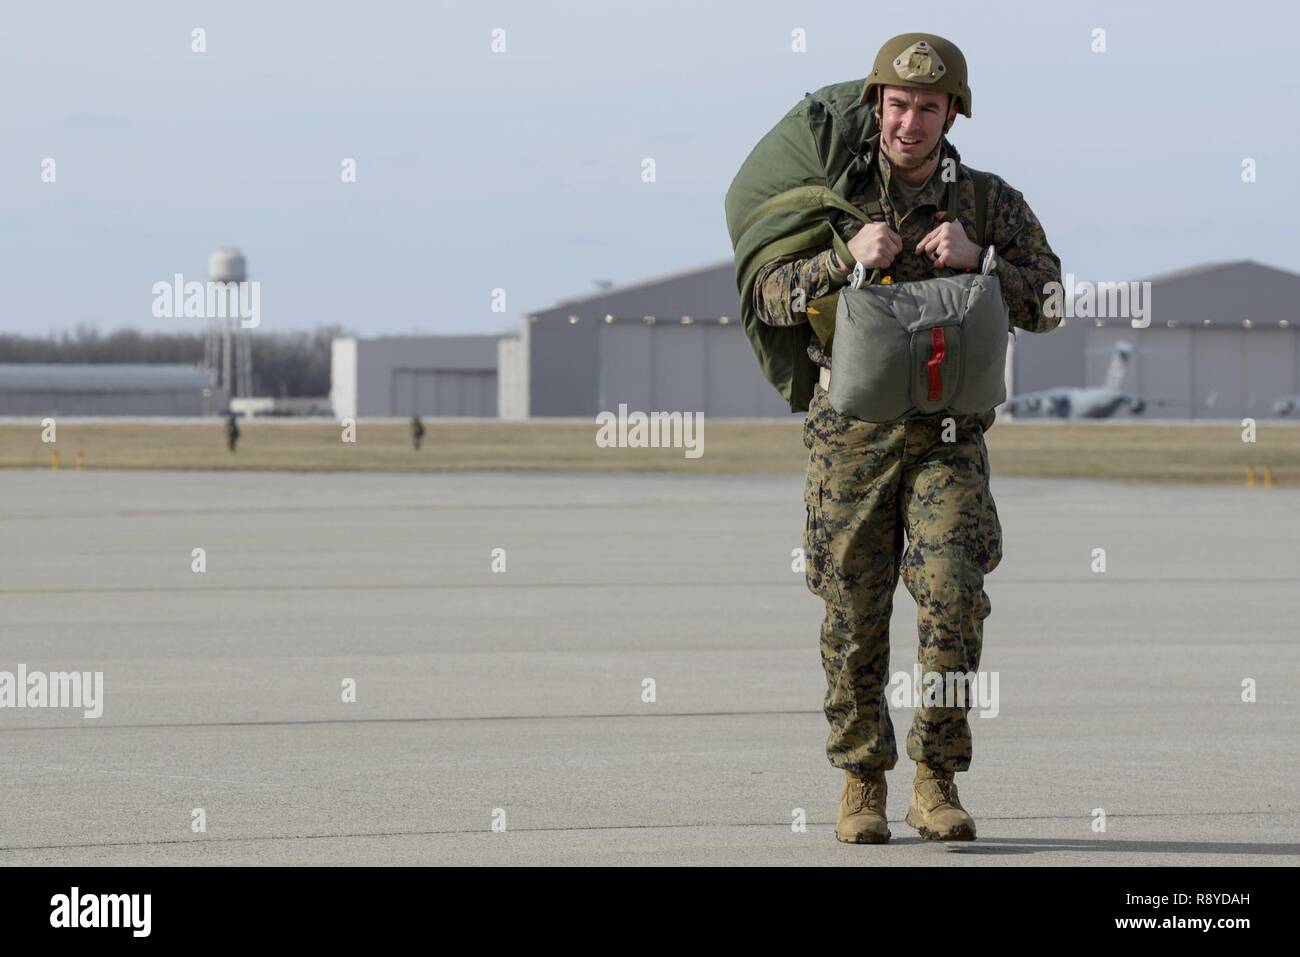 Marine Capt. Richard Spicer, a firepower control team leader with the 4th Air Naval Gunfire Liaison Company, West Palm Beach, Fla., returns from the drop zone after a successful jump at Wright-Patterson Air Force Base, Ohio, March 11, 2017. Members of the 88th Operations Support Squadron, 88th Security Forces Squadron, 788th Civil Engineer Squadron, and 88th Medical Operations Squadron provided support to the paratroop operations. Stock Photo